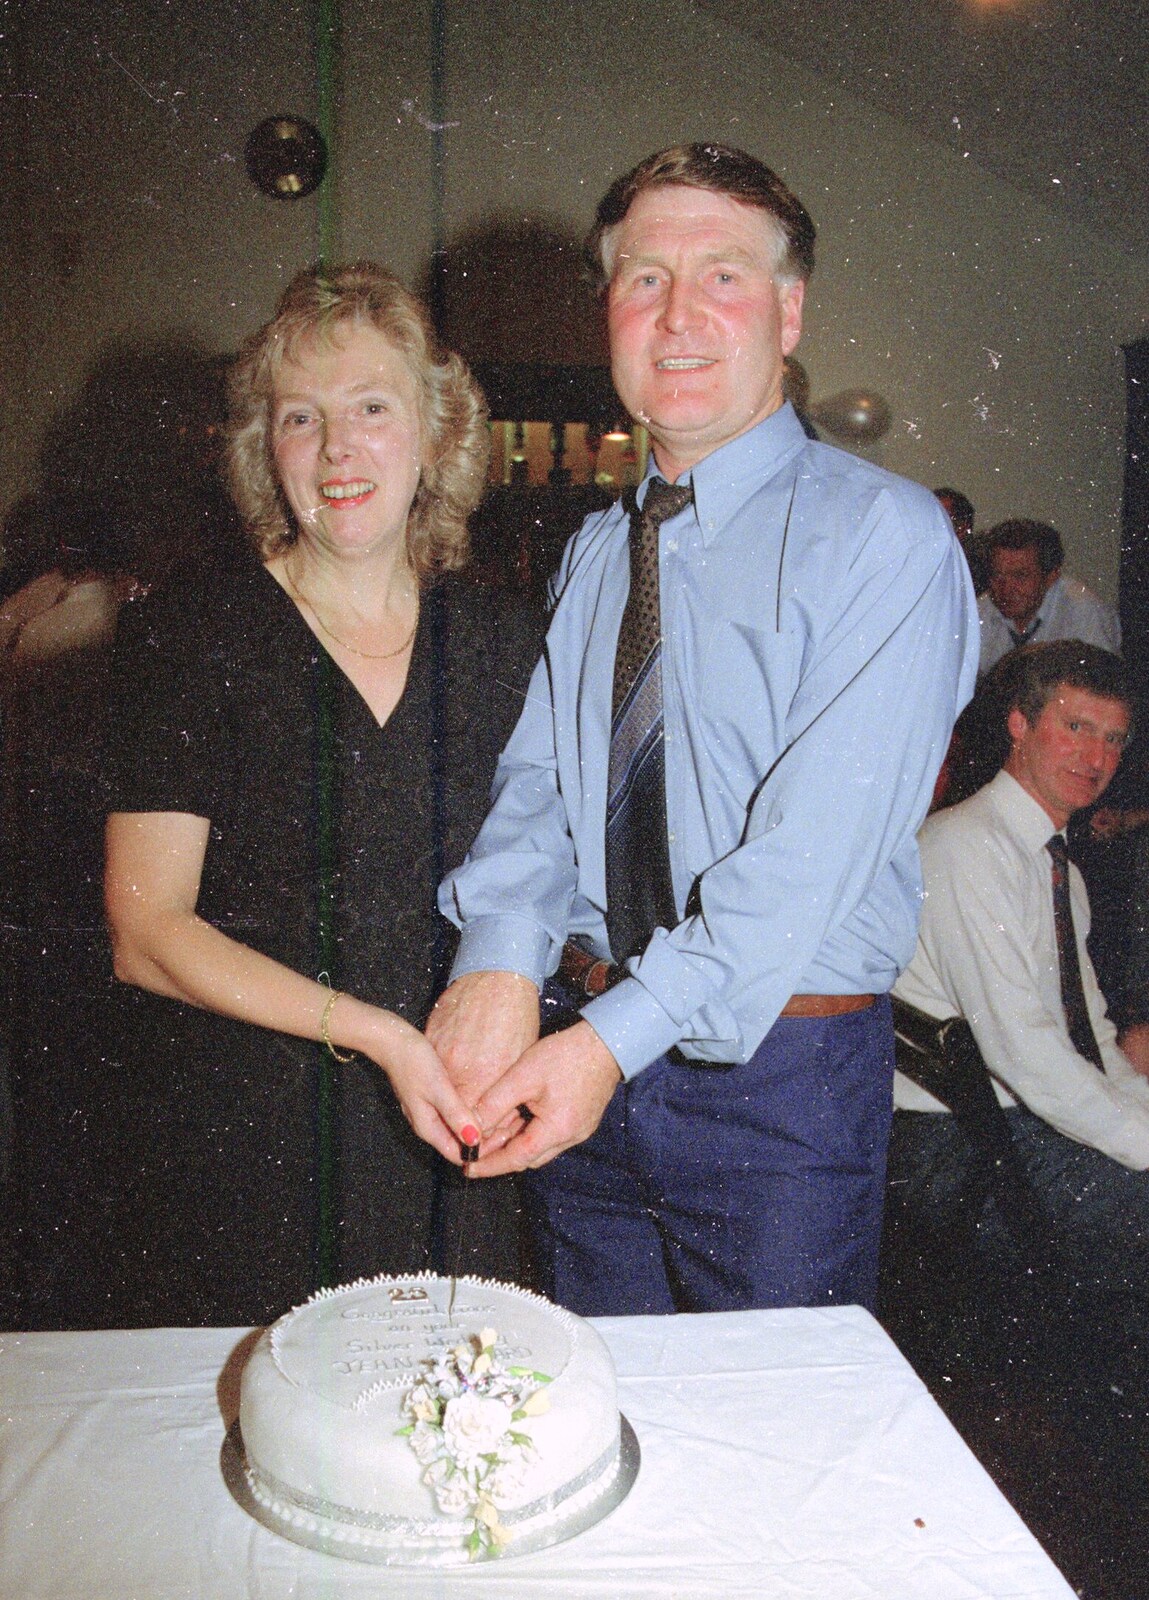 Jean and Bernie celebrate their anniversary from Cider Making With Geoff and Brenda, Stuston, Suffolk - 10th September 1998